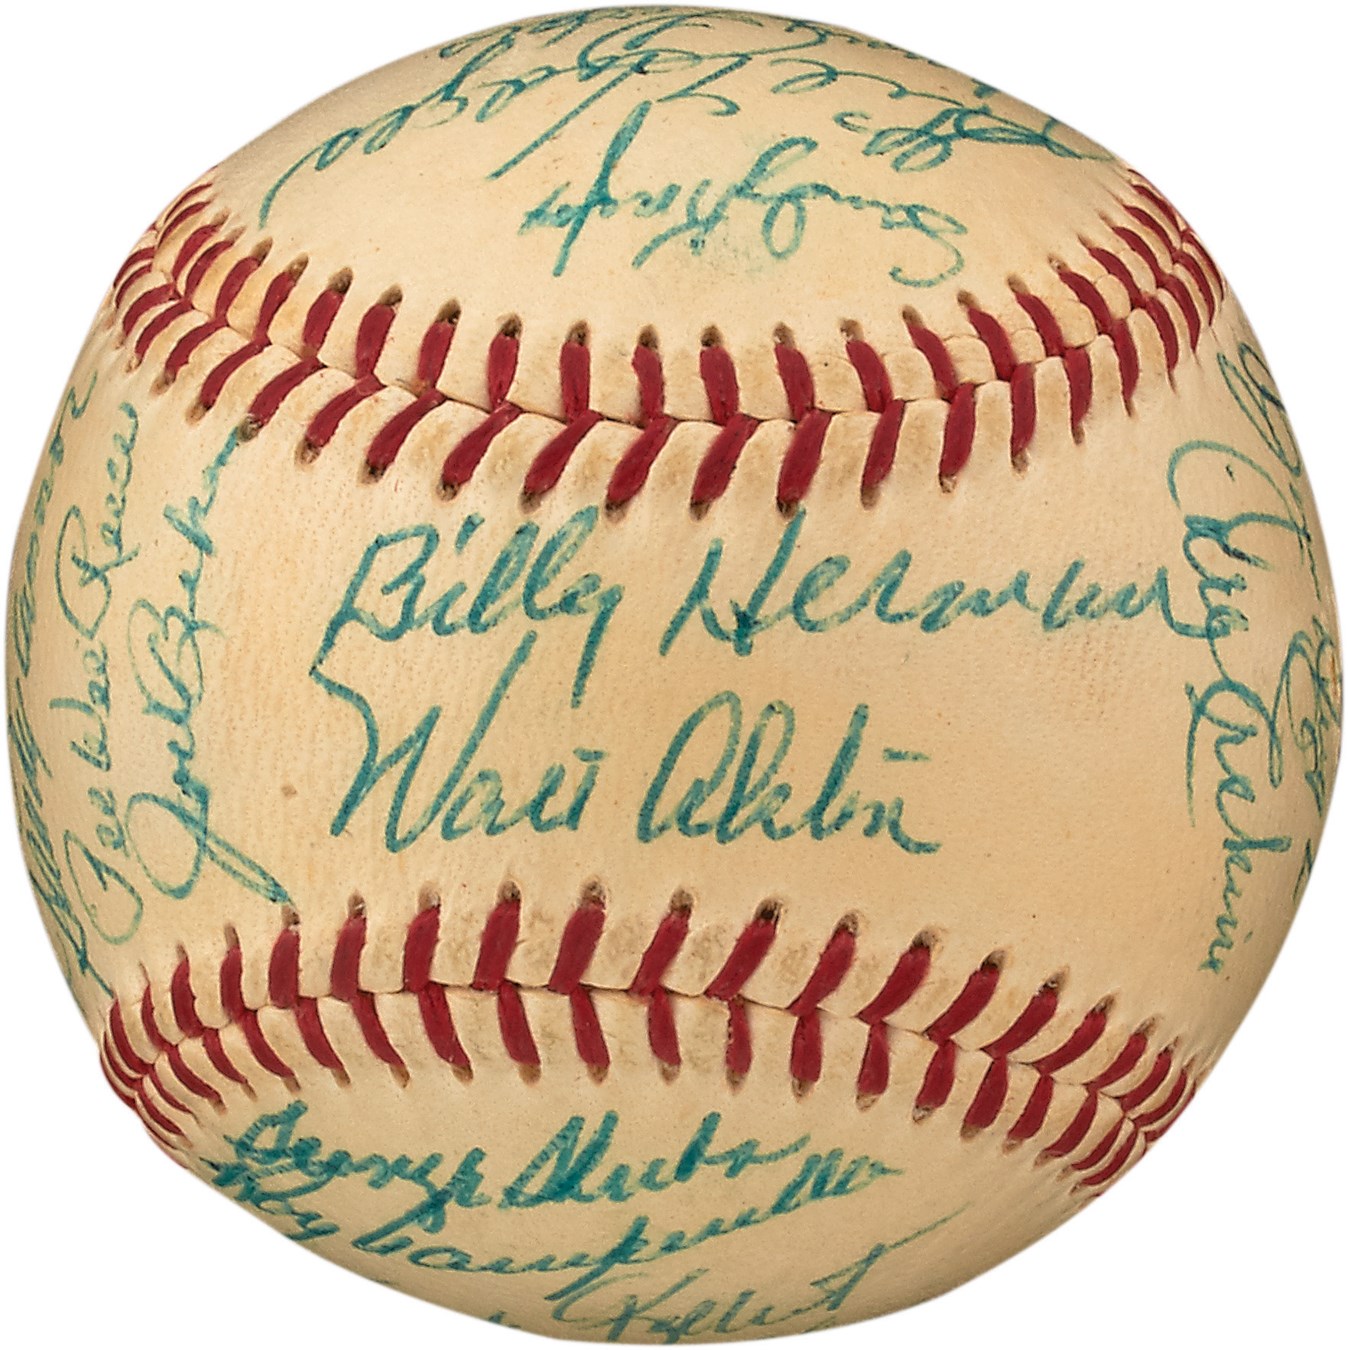 The Finest 1955 Brooklyn Dodgers Team-Signed Baseball Extant (NO Clubhouse Signatures, PSA NM-MT 8)